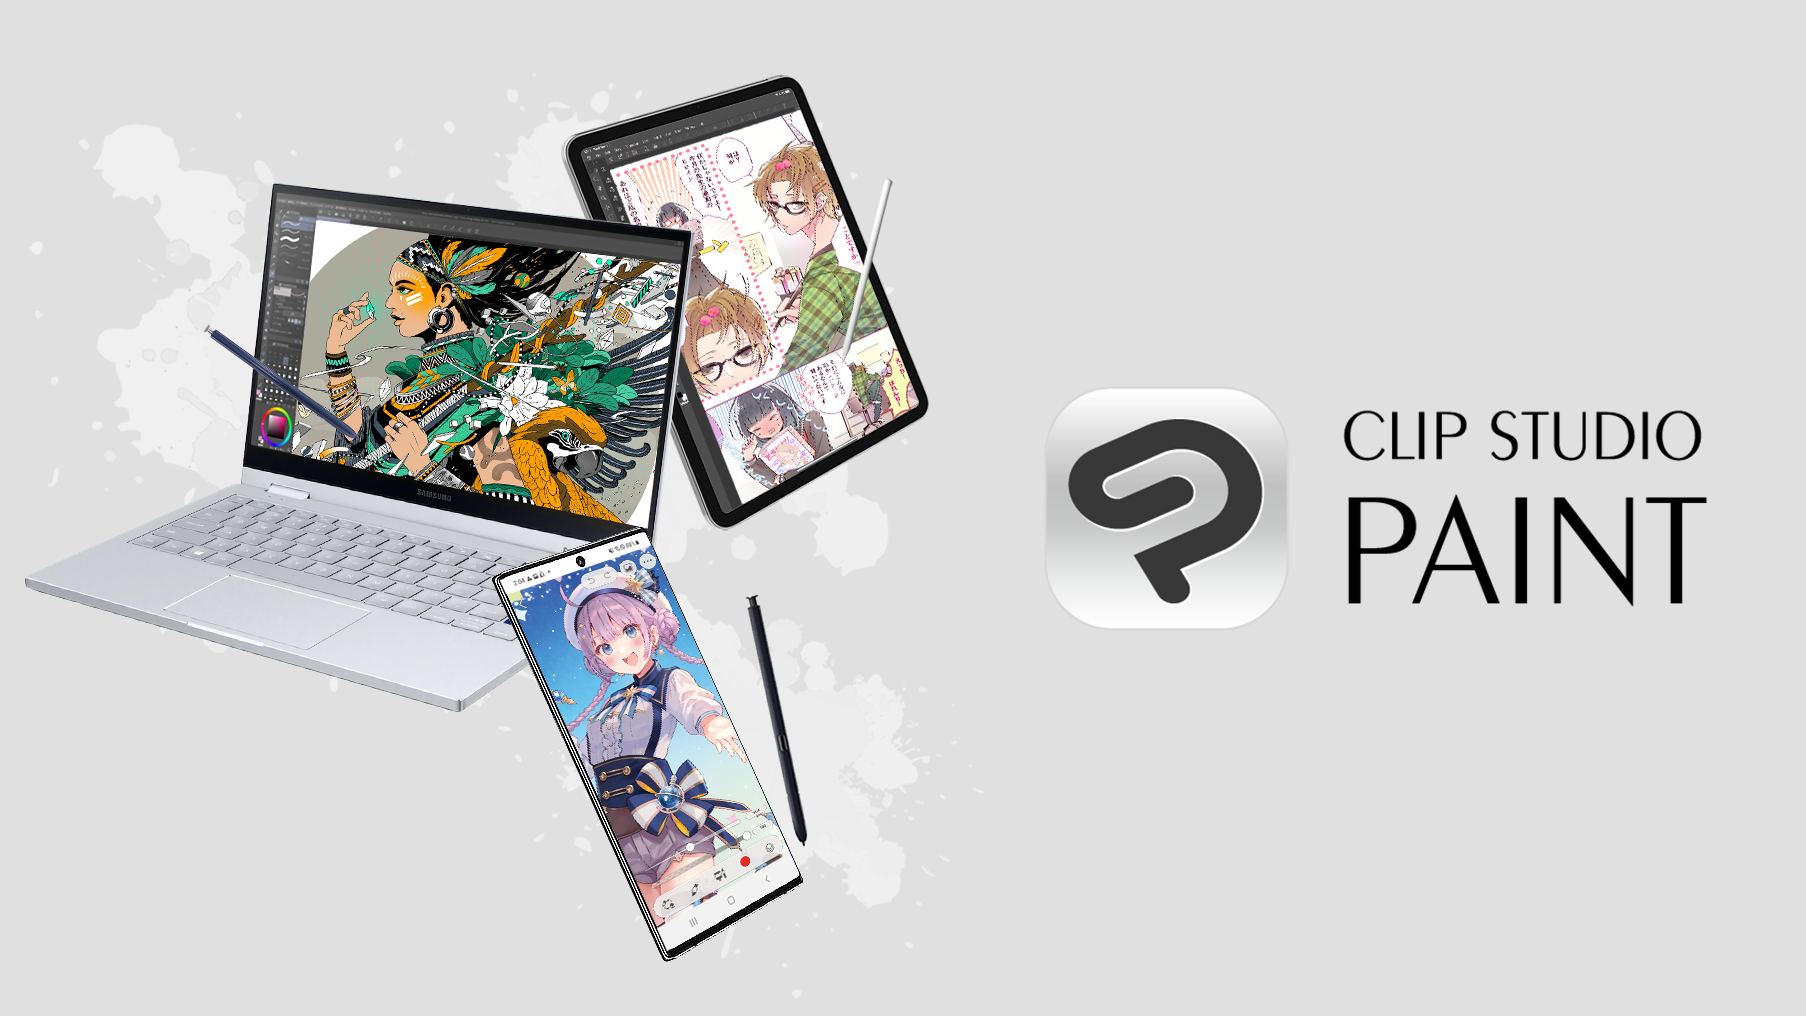 More than 8 million creators signed up to Clip Studio, offering services that support illustrators, comic & webtoon artists, and animators